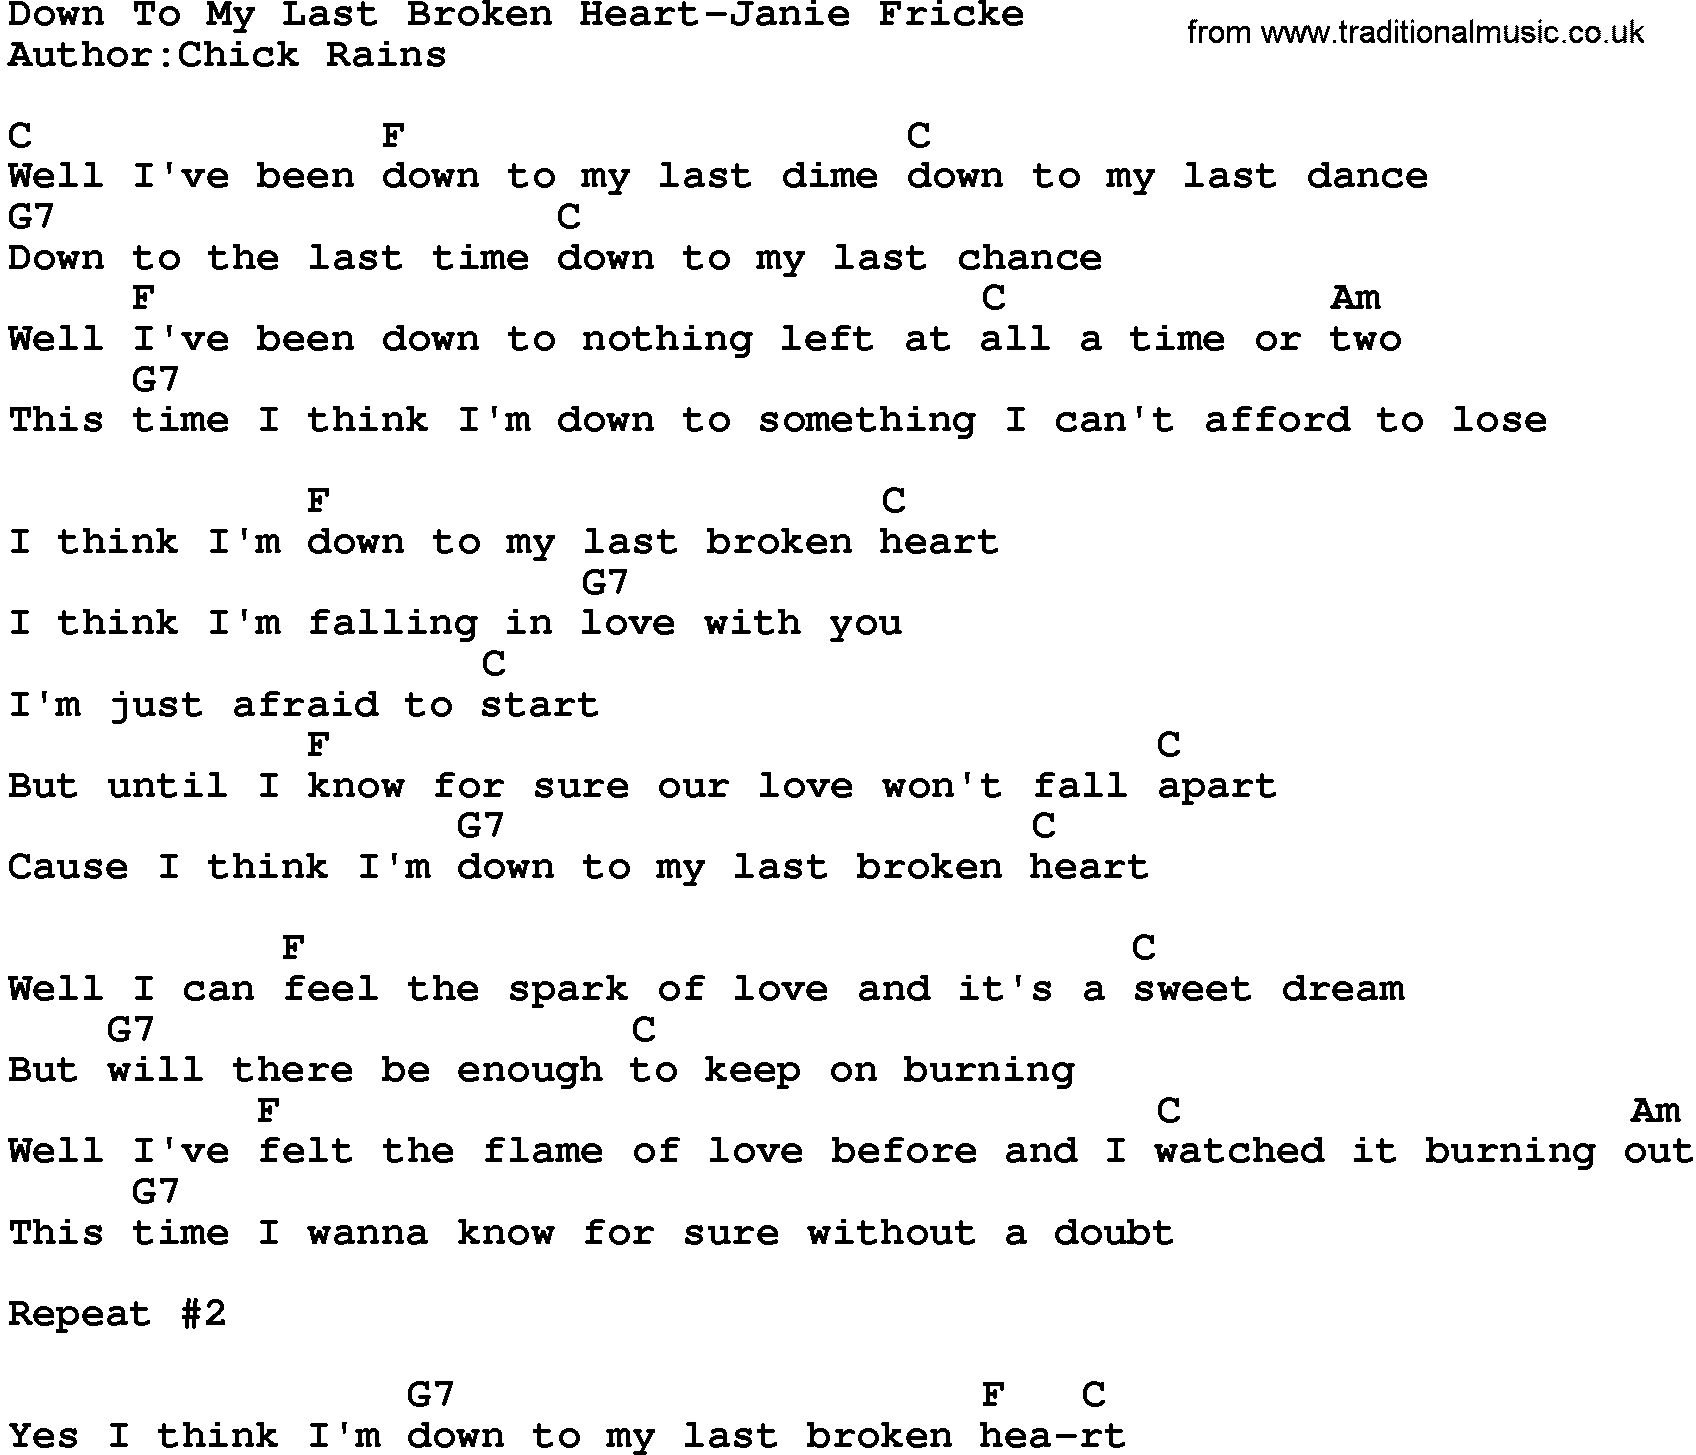 Country music song: Down To My Last Broken Heart-Janie Fricke lyrics and chords